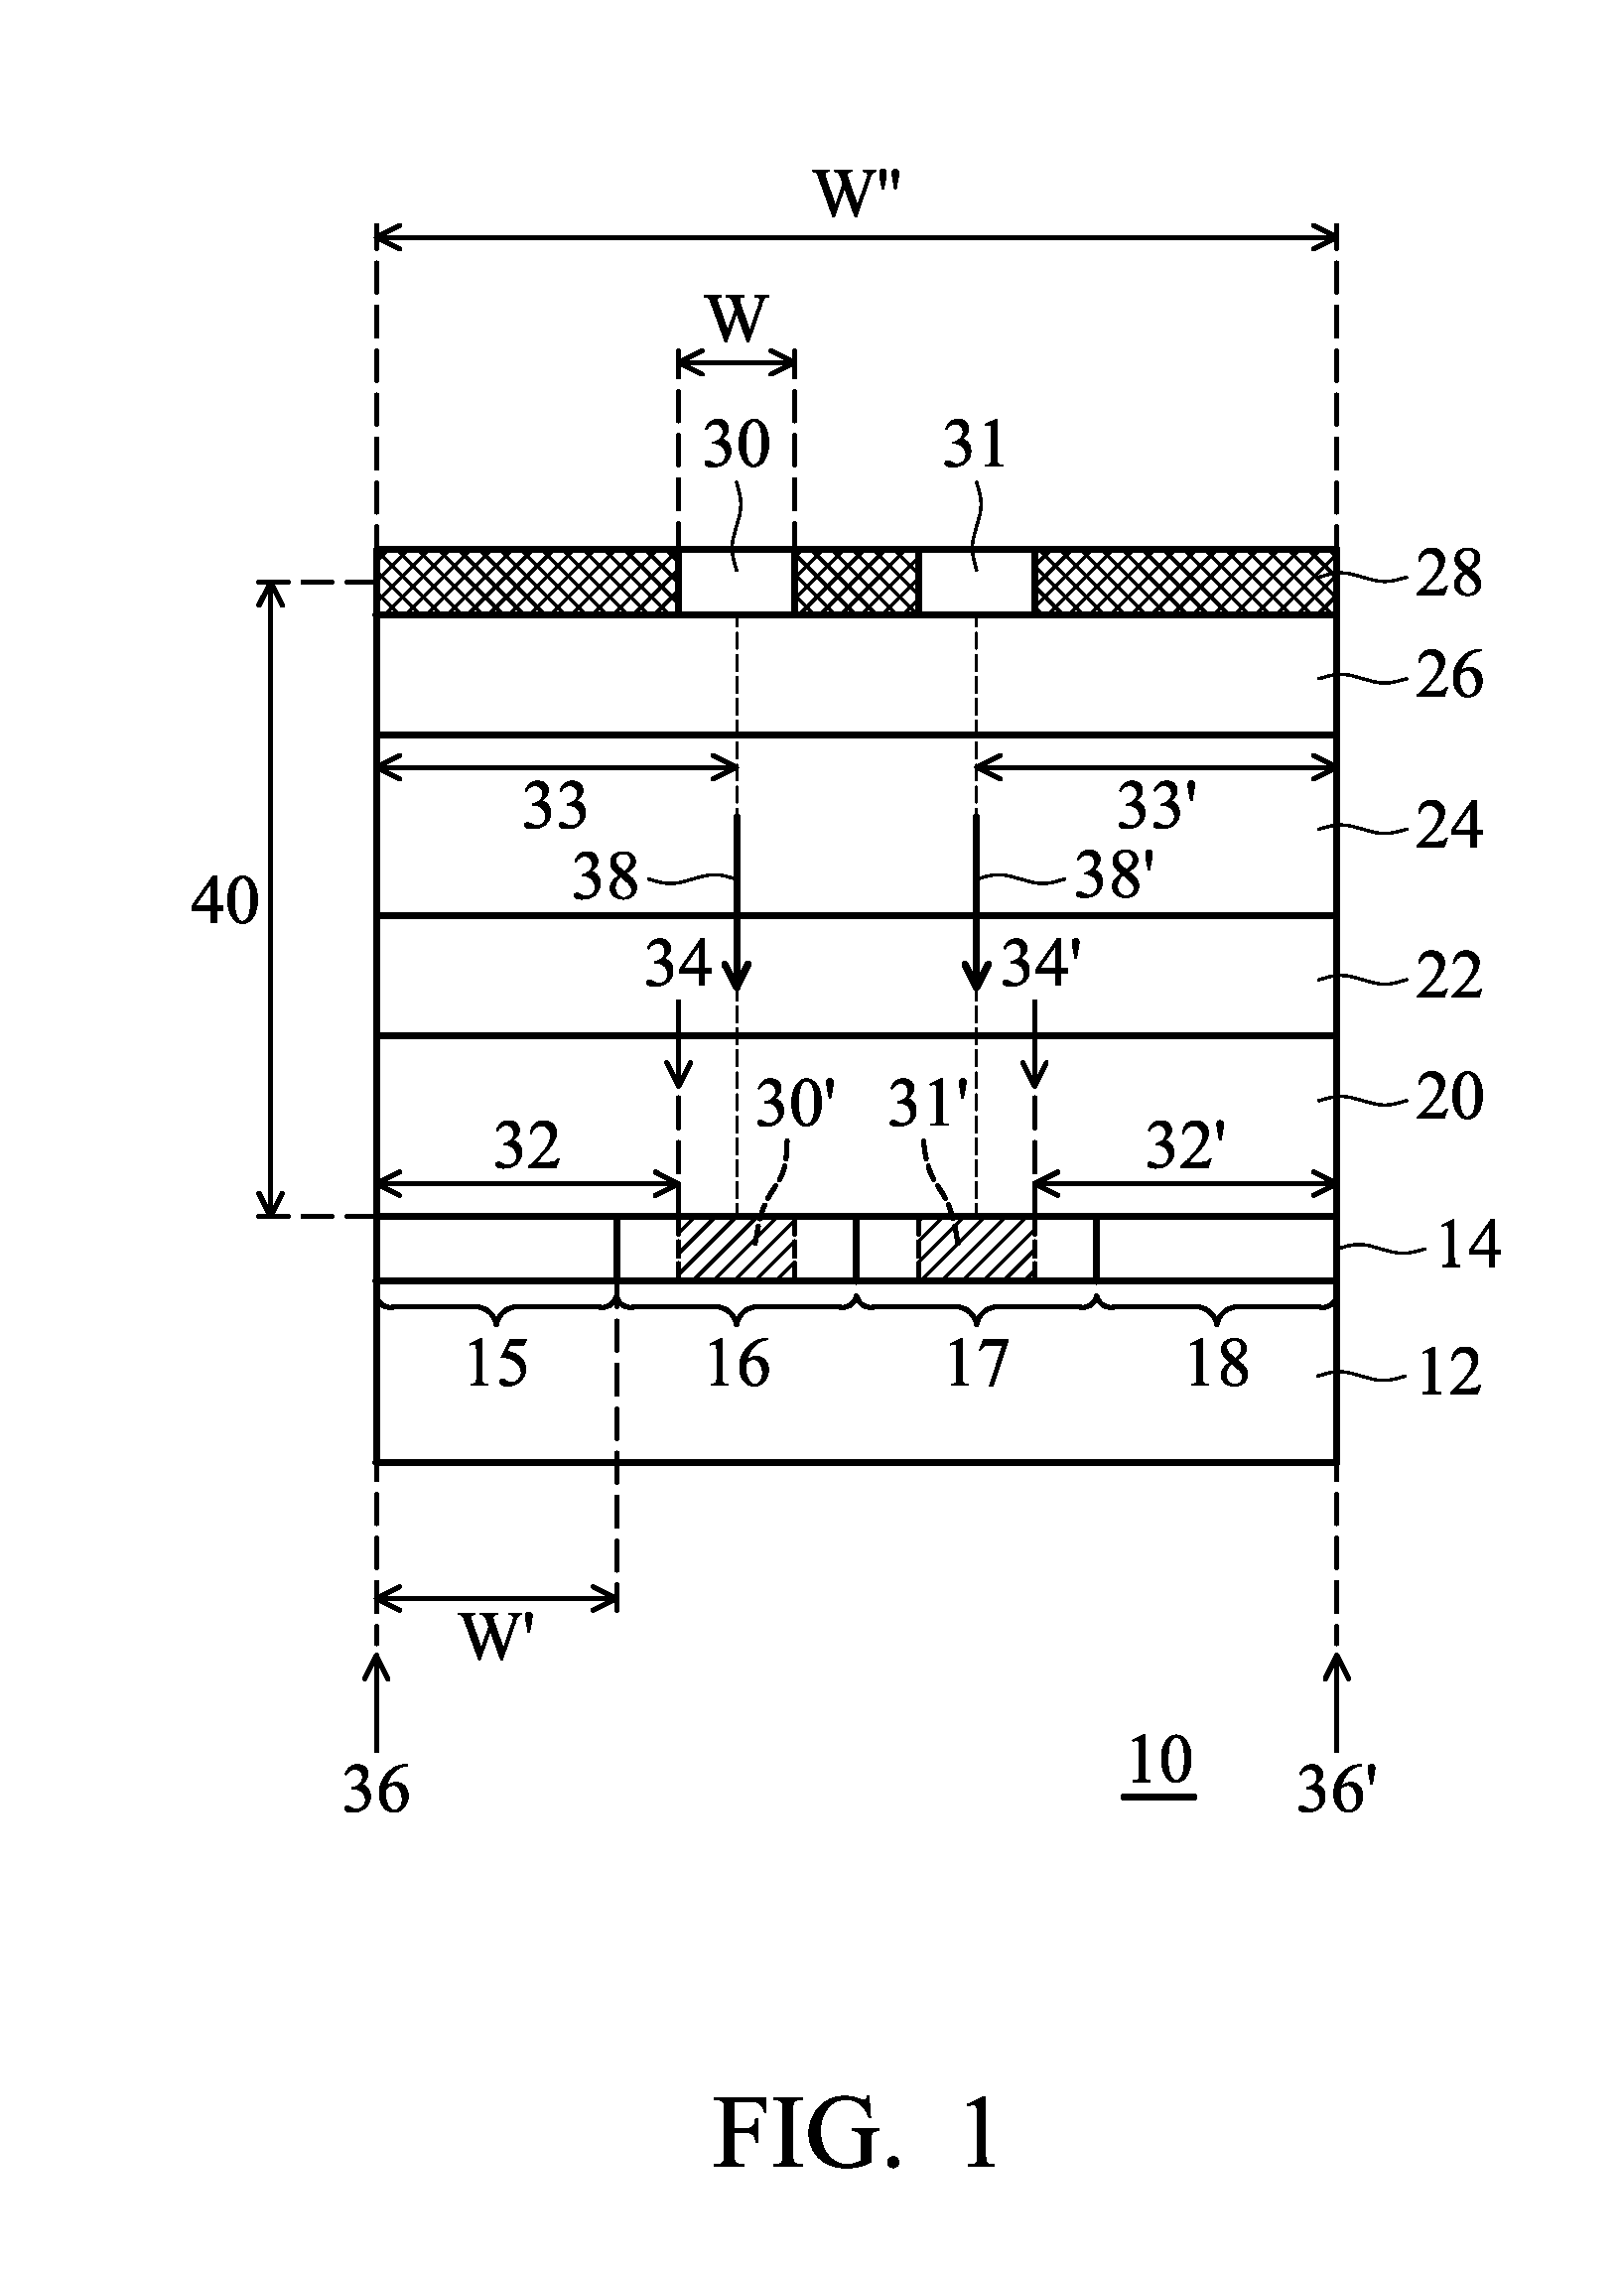 Stereophonic display devices